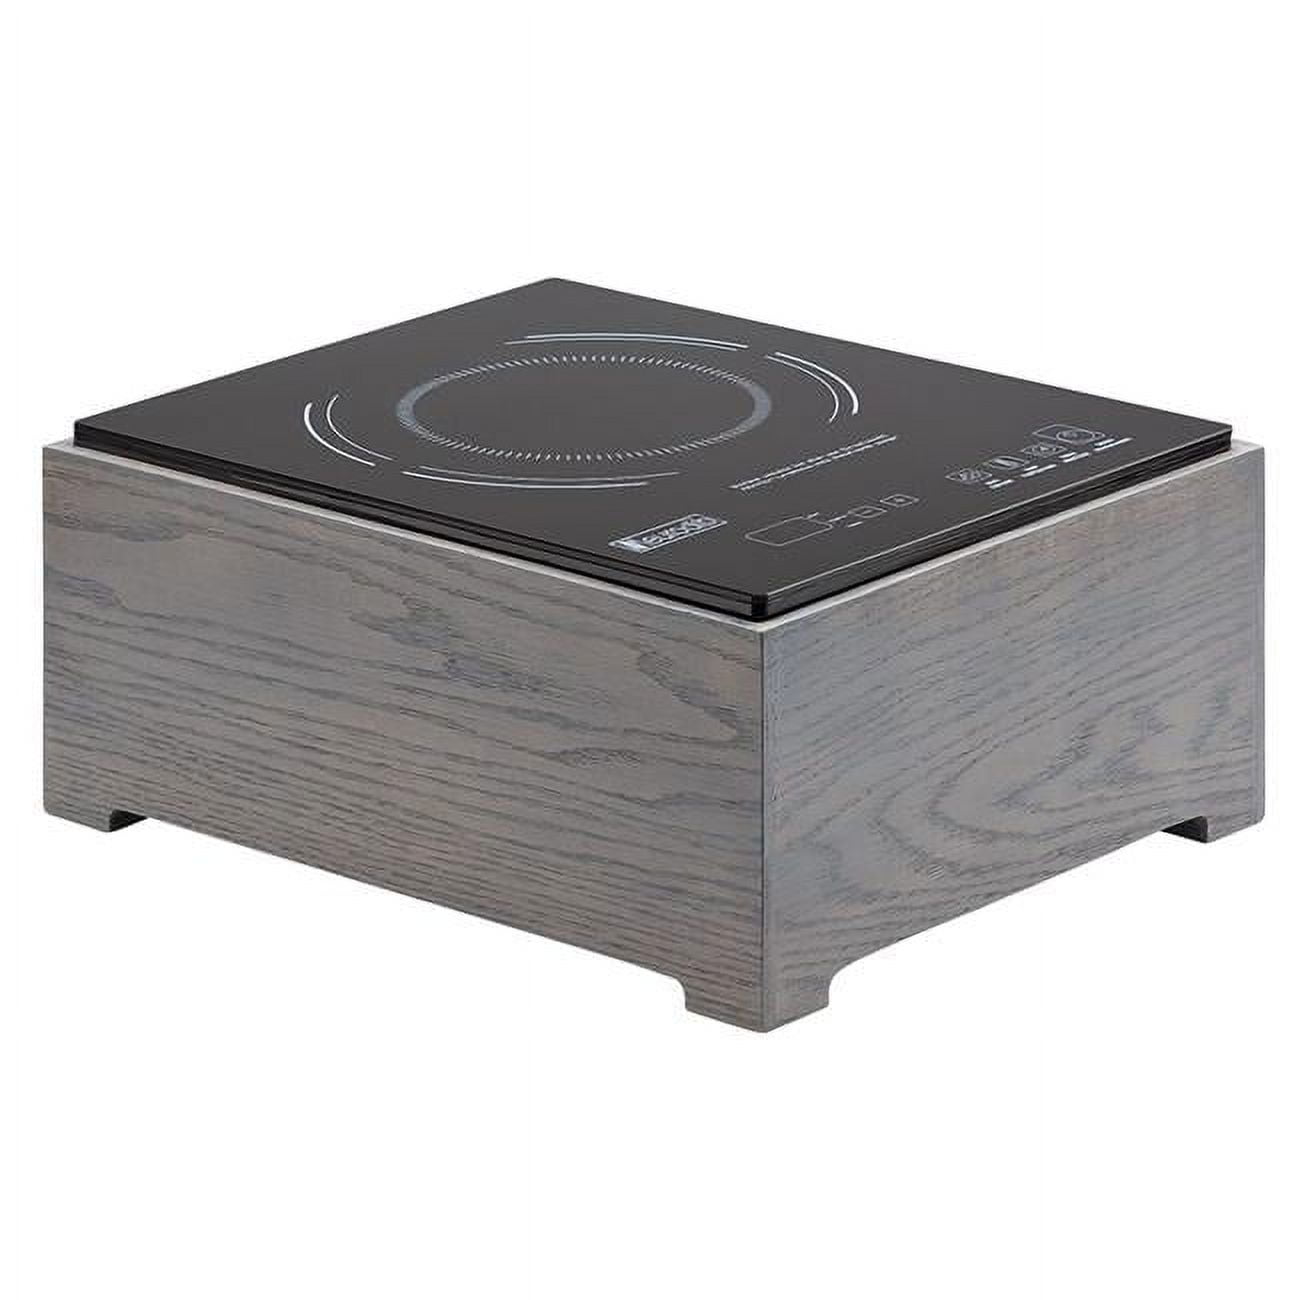 Picture of Cal Mil 3633-83 Ashwood Countertop Induction Cooker - 120V&#44; 1600W - 12.75 x 15.875 x 7.125 in.